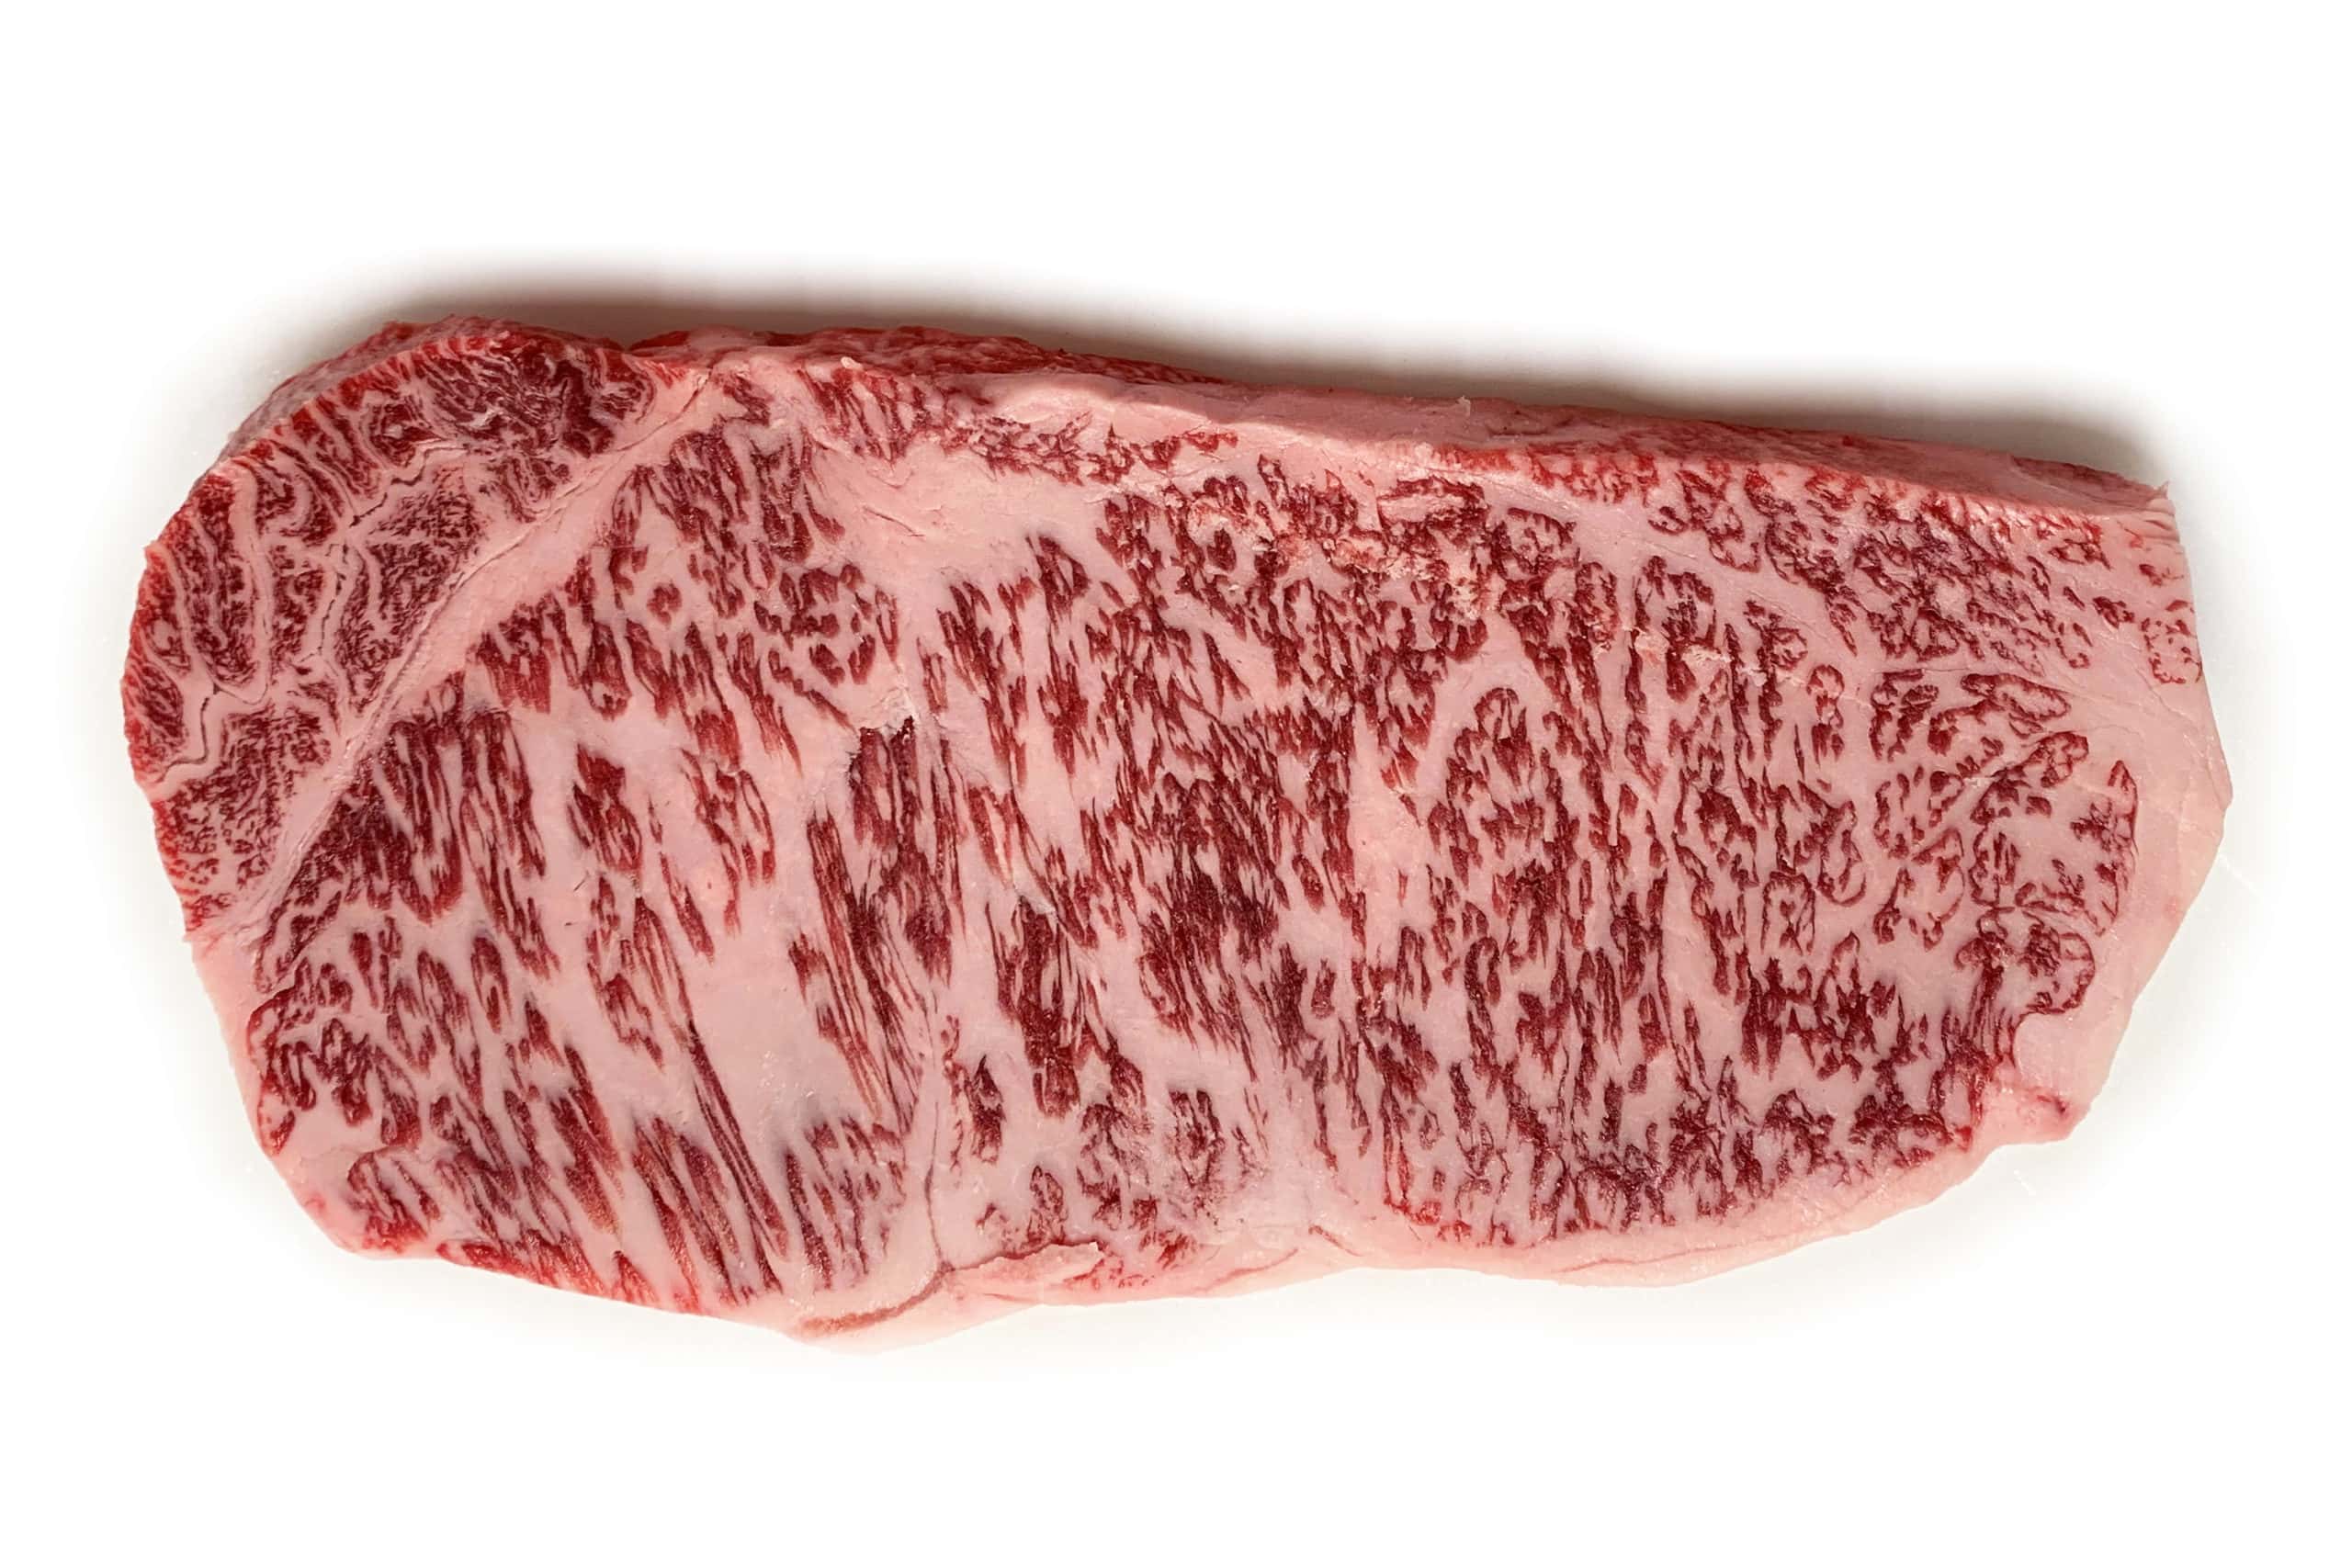 A5 Japanese Wagyu New York Strip Steak - 100% Authentic from